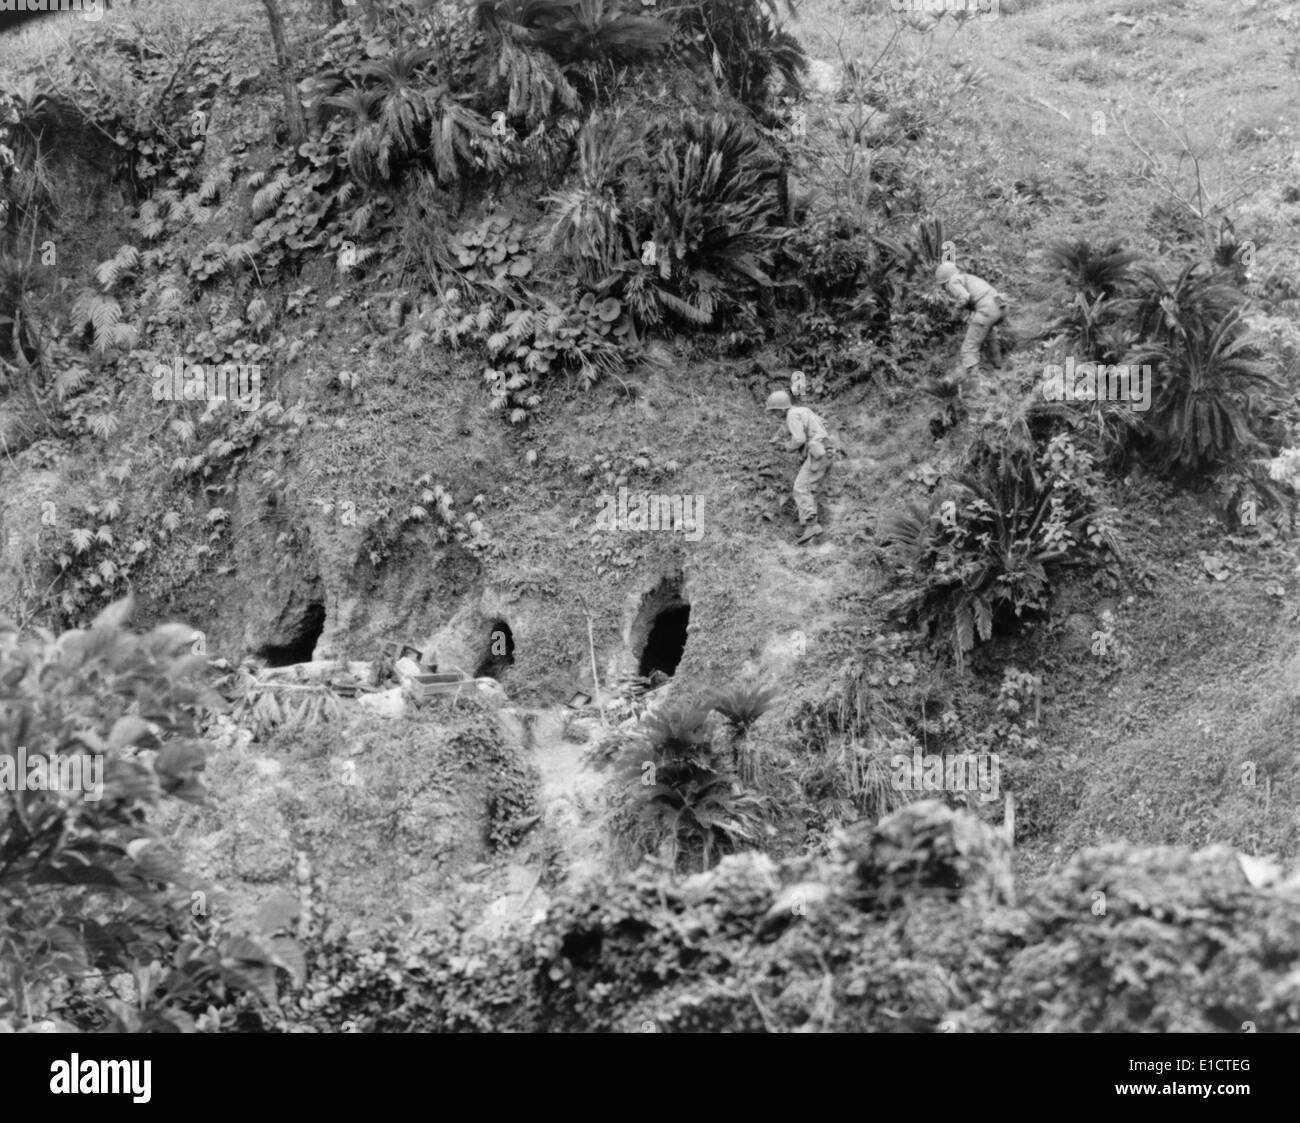 Two U.S. soldiers to throw grenades into Japanese held caves on Okinawa Island, May 16, 1945. Soldiers are with the 27th Stock Photo